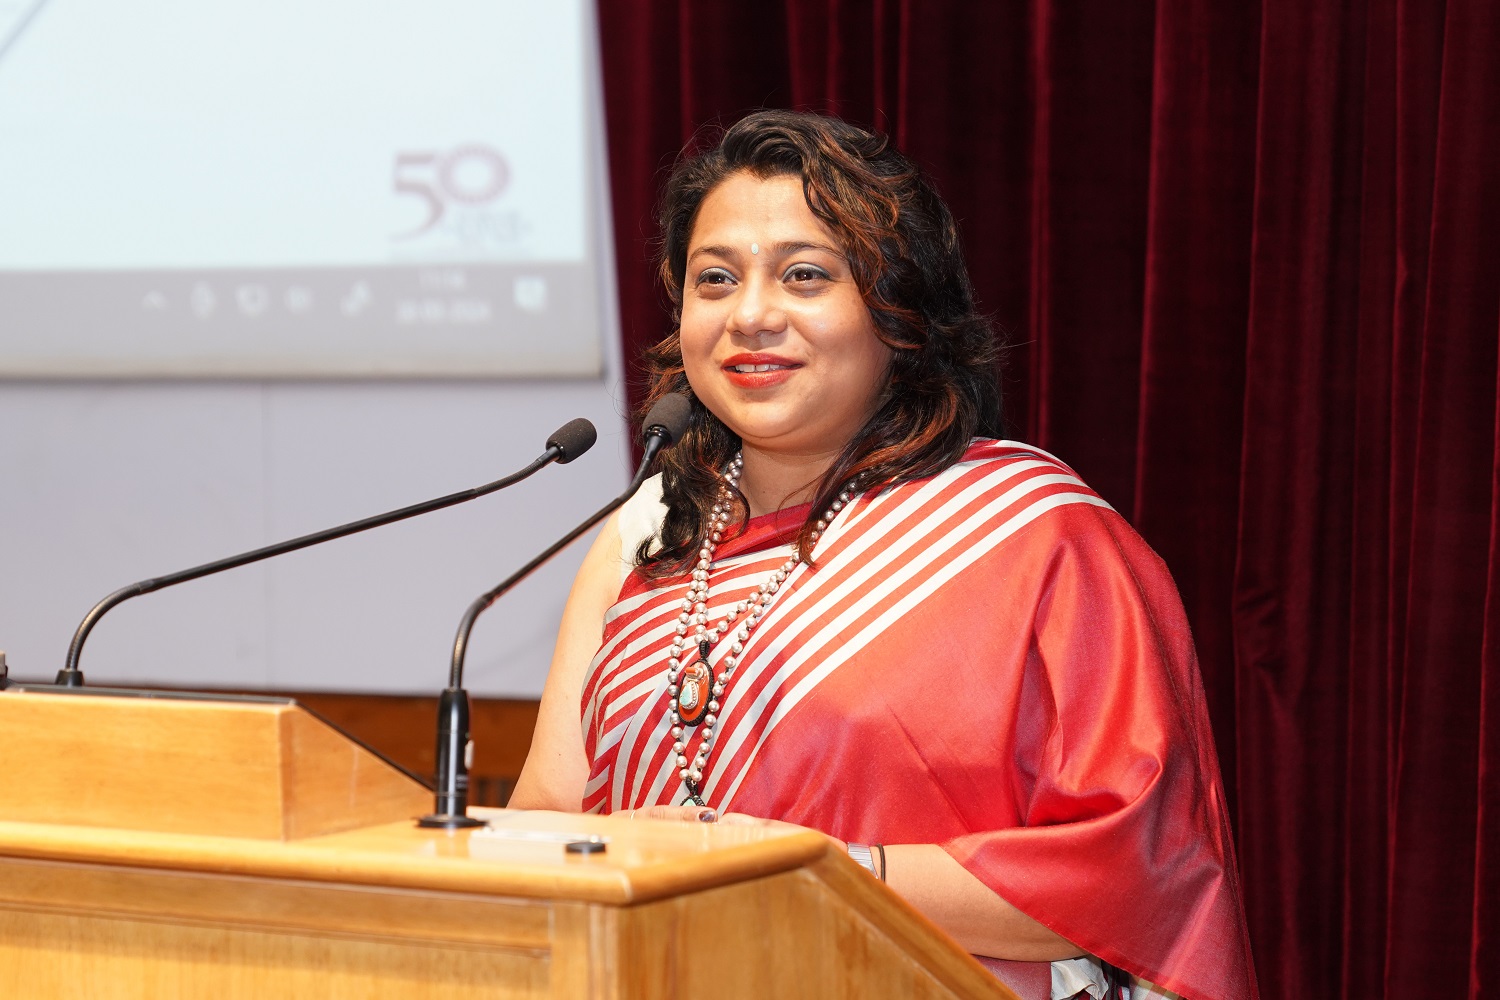 Chief Guest Sukanya Roy, IIMB alumna (EPGP 2013 batch) and Director at NASSCOM, delivers the special address, highlighting her own IIMB journey and opportunities EPGP offers to its participants. 